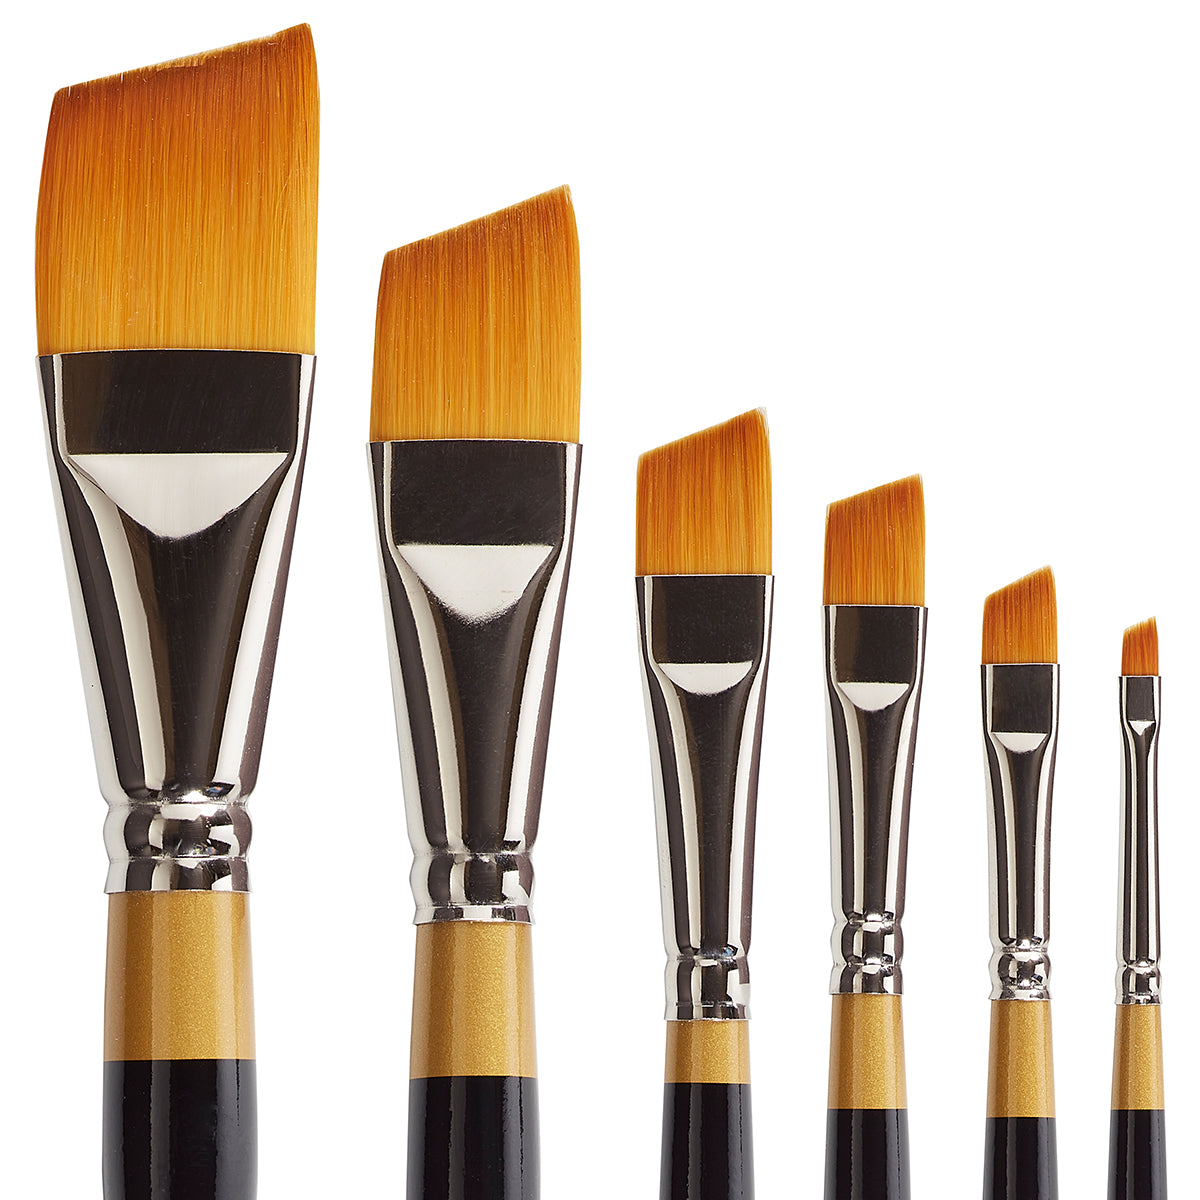 12 Piece Special Effects Artist Paint Brush Set - Taklon Synthetic